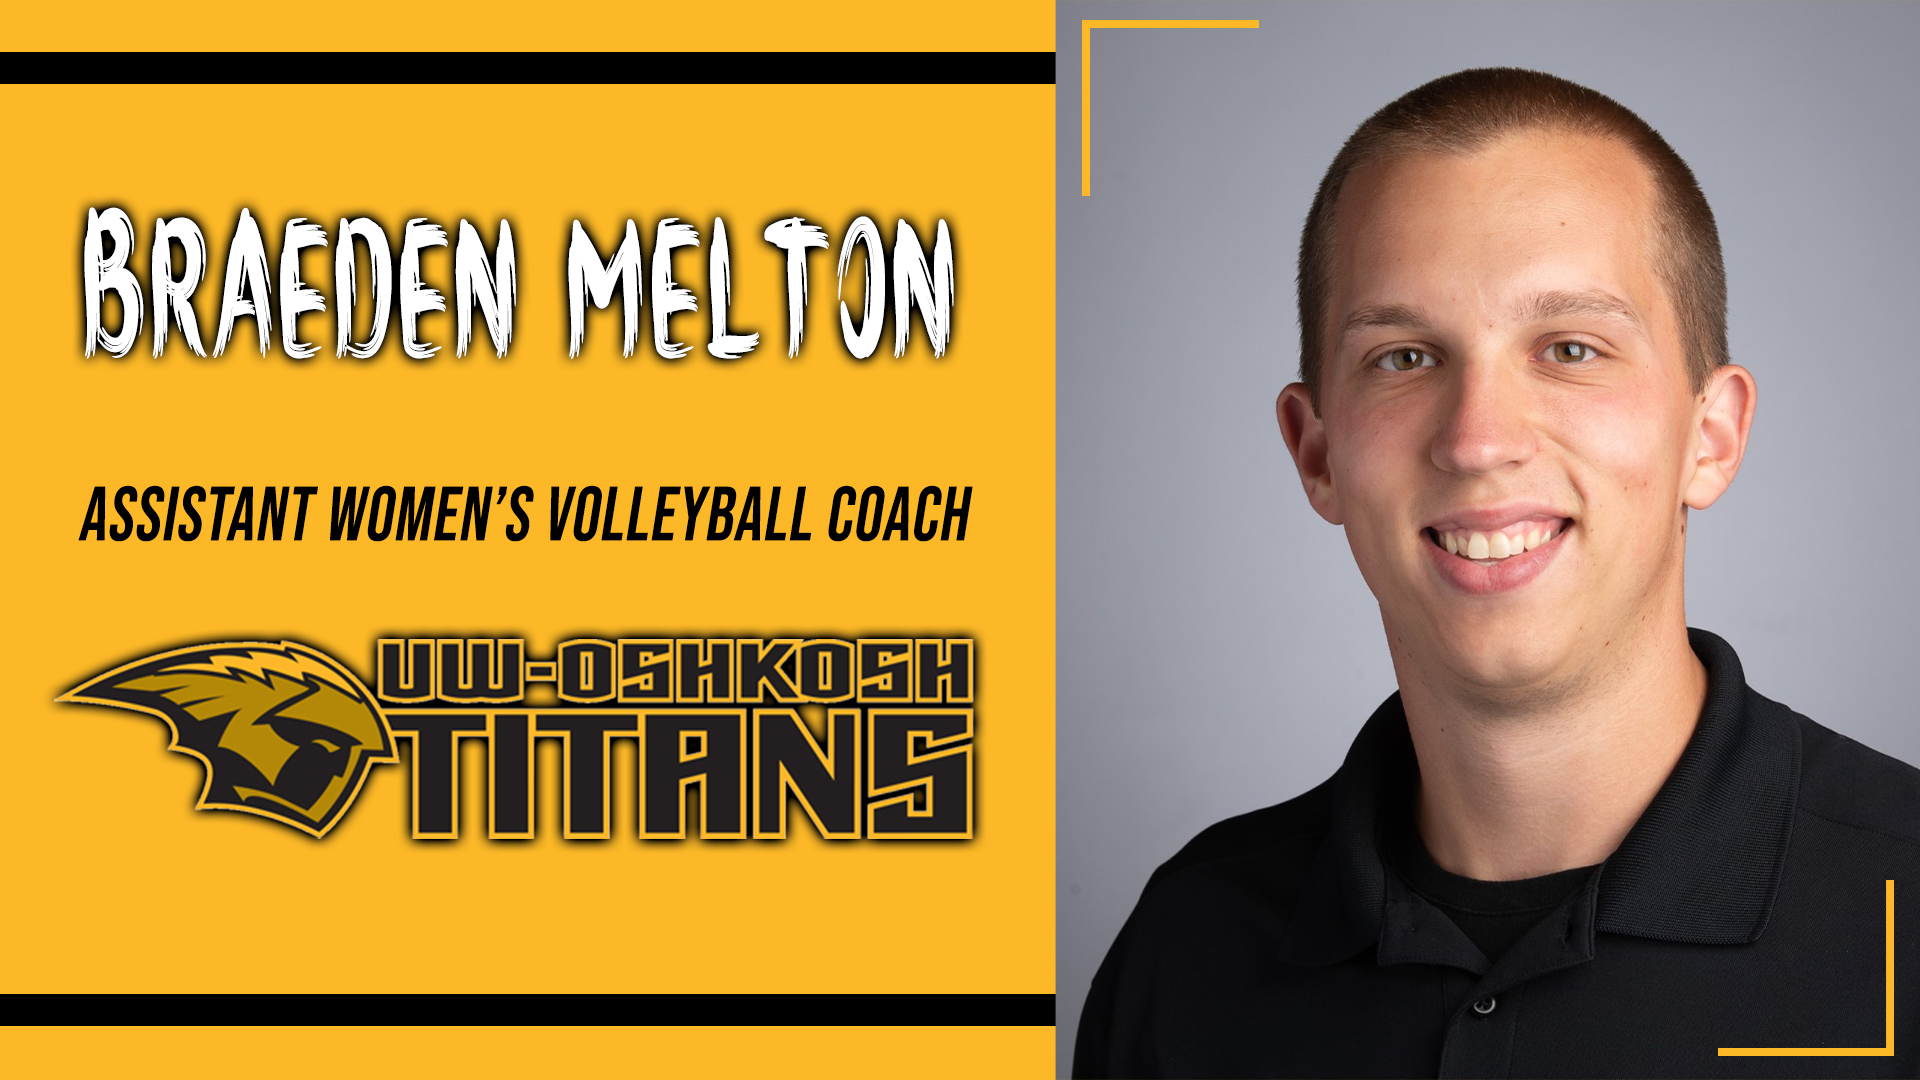 Melton Promoted To Full-Time Assistant Volleyball Coach